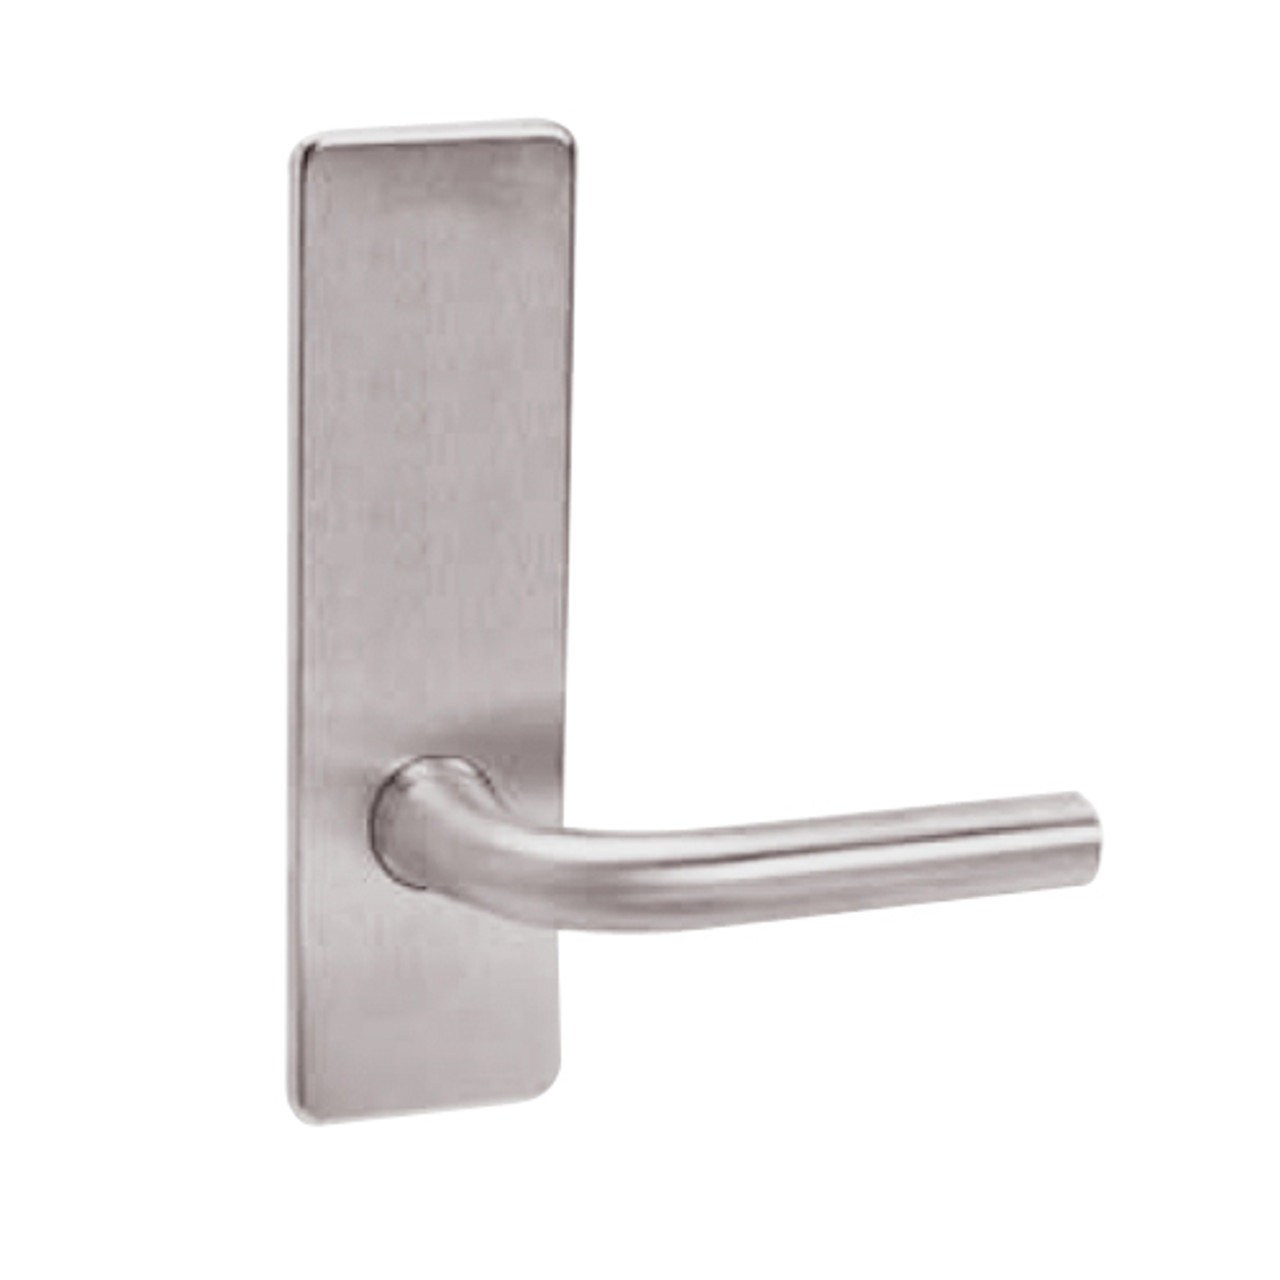 ML2020-RWR-630-M31 Corbin Russwin ML2000 Series Mortise Privacy Locksets with Regis Lever in Satin Stainless